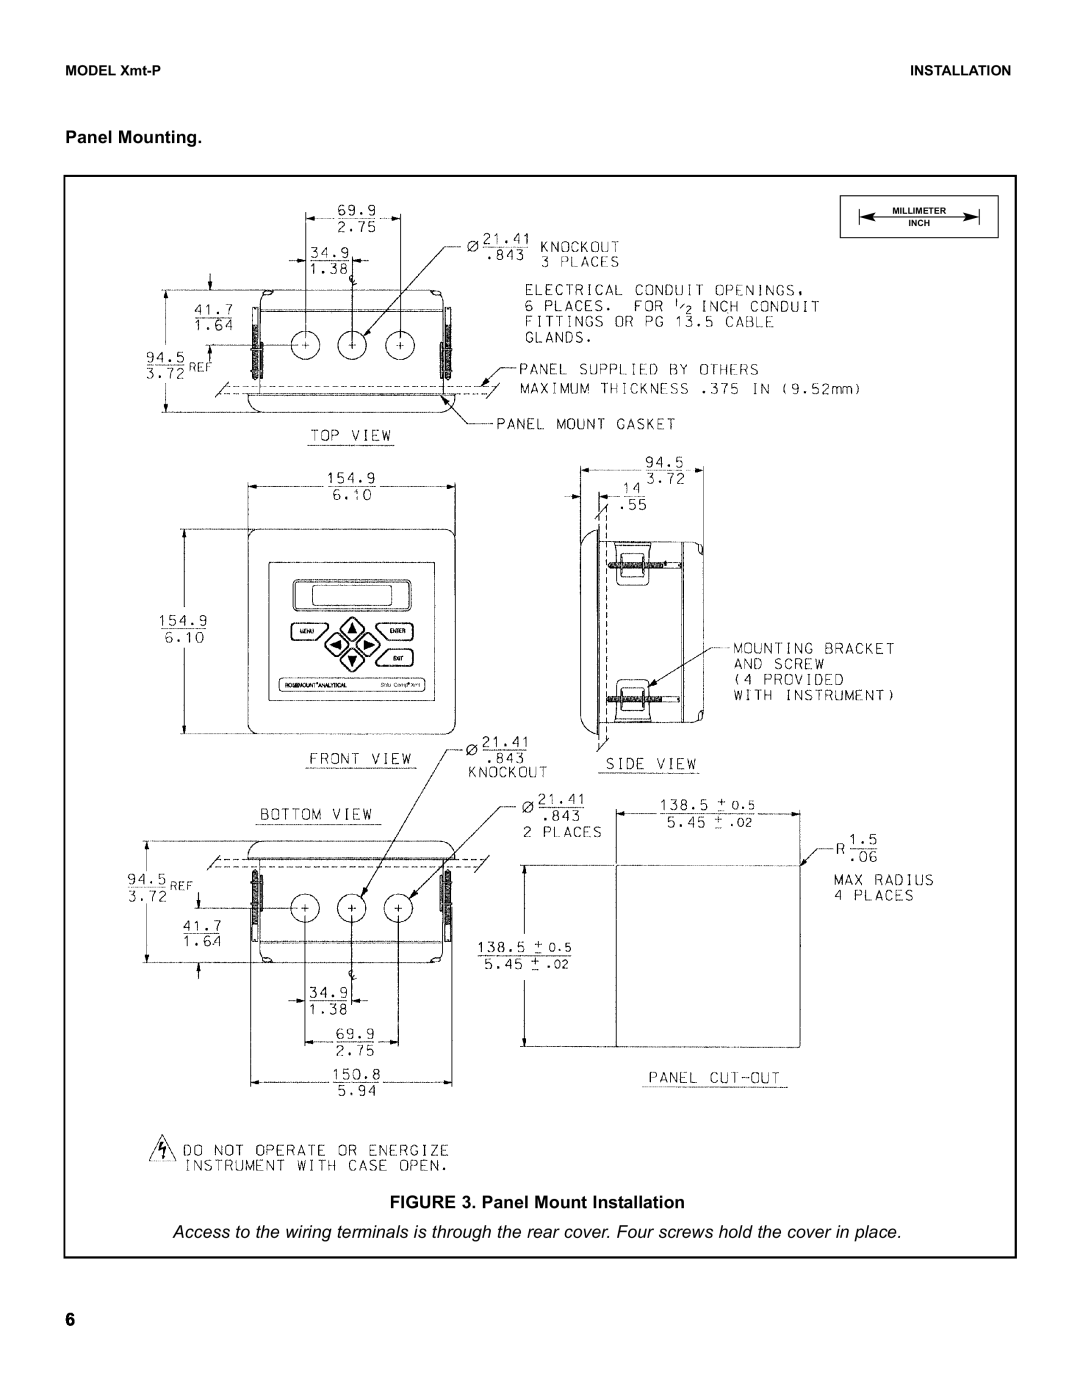 Emerson XMT-P-FF/FI instruction sheet Panel Mounting, Panel Mount Installation, MODEL Xmt-P, Inch, Millimeter 